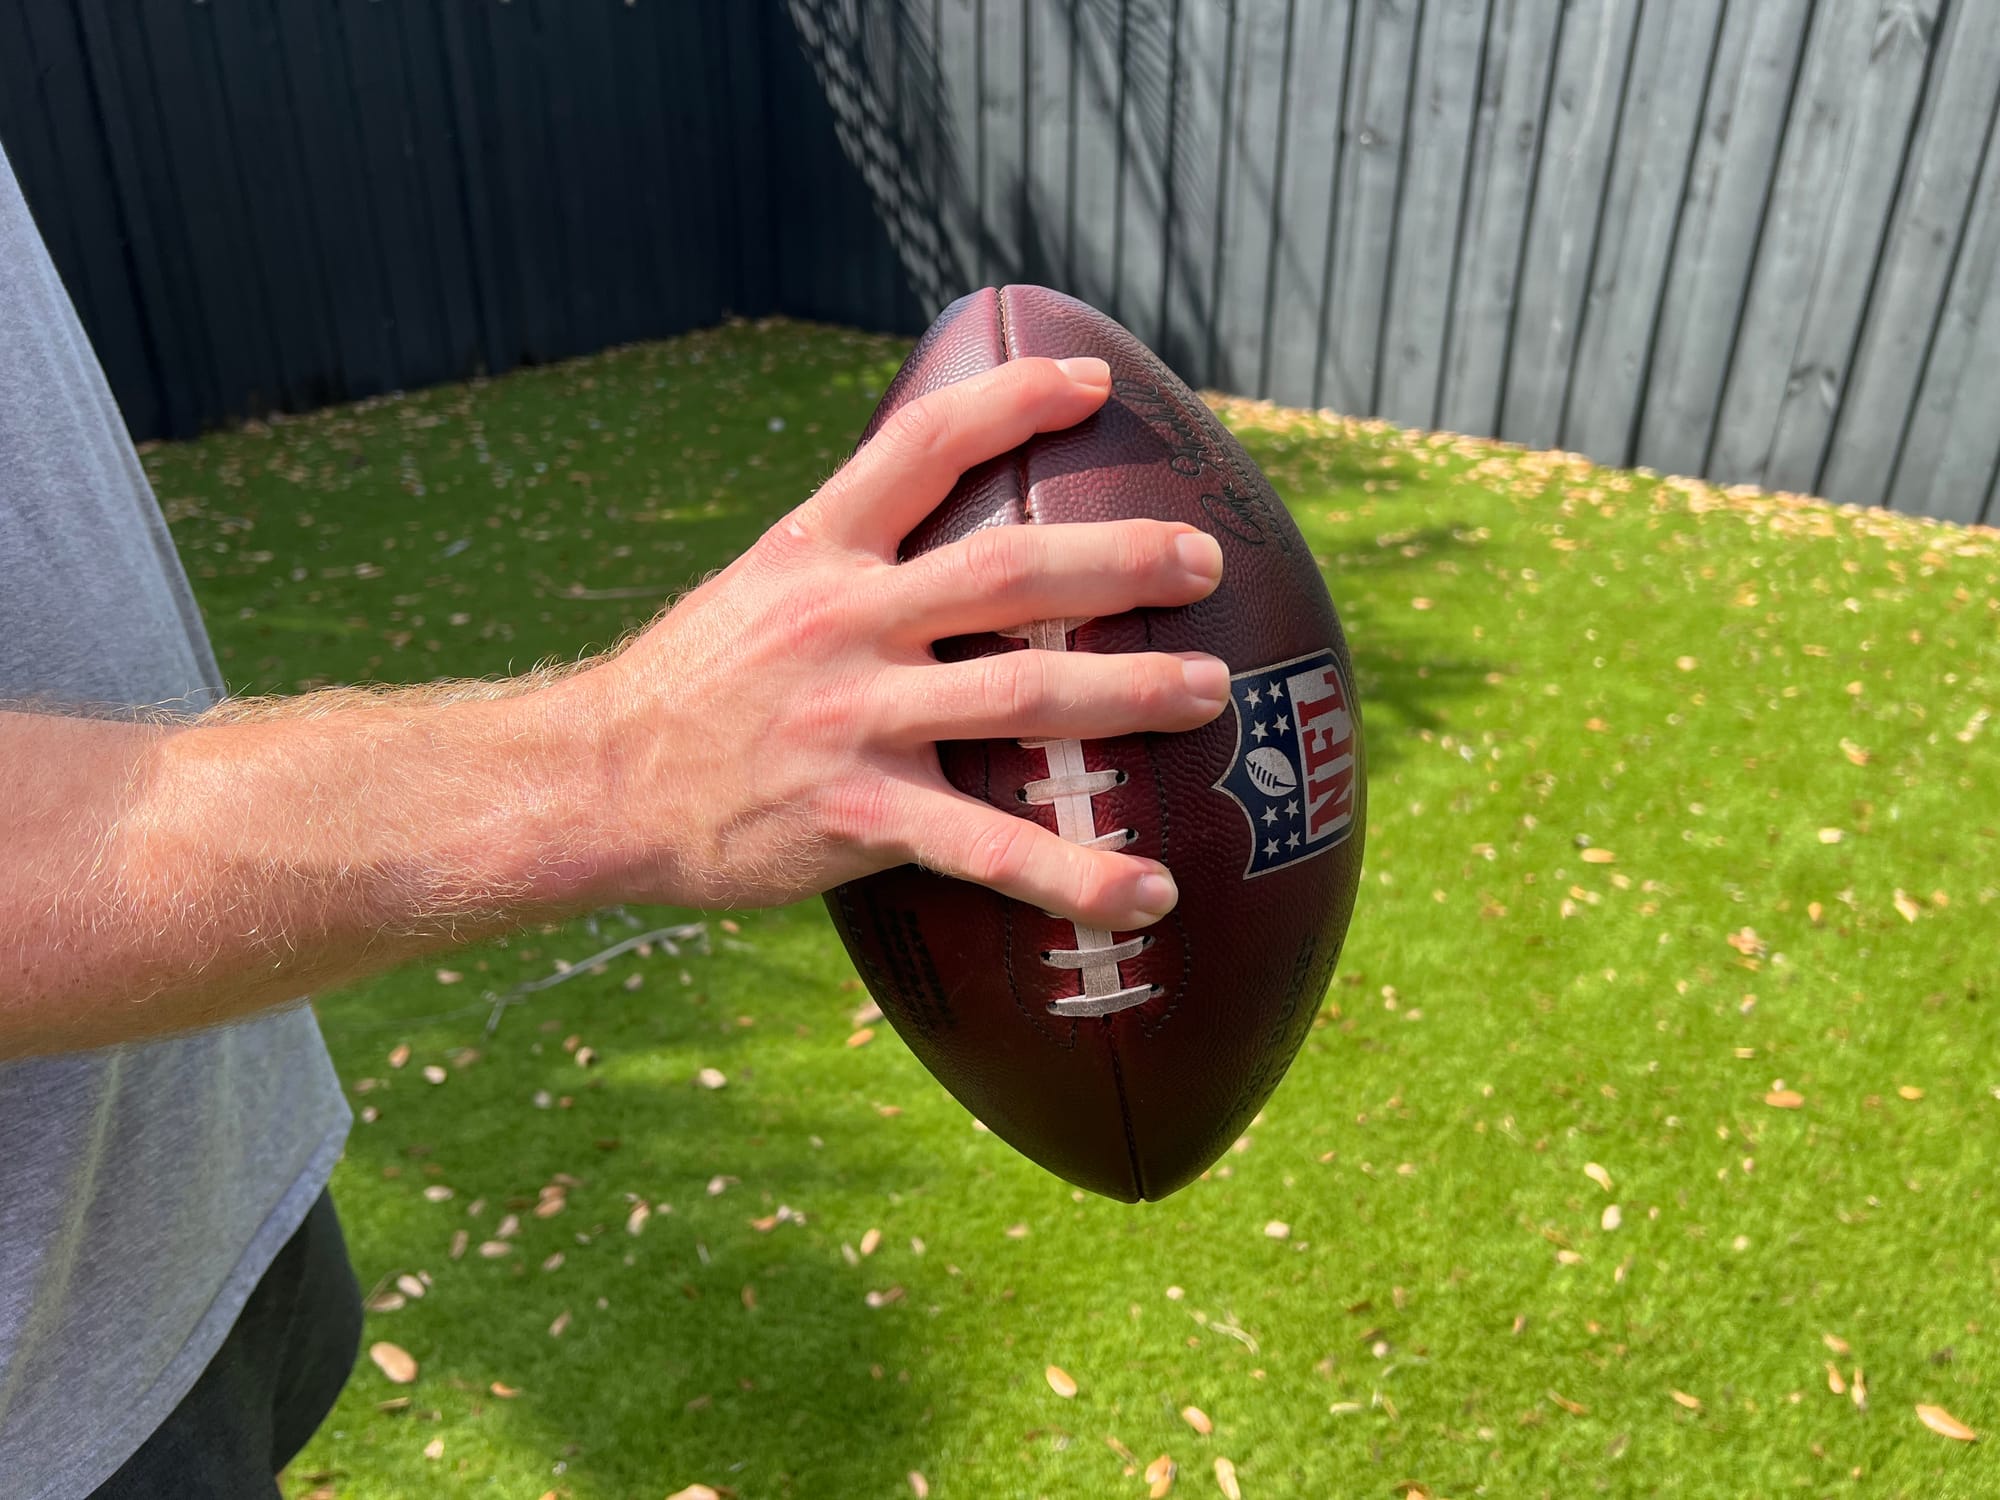 How to Grip a Football